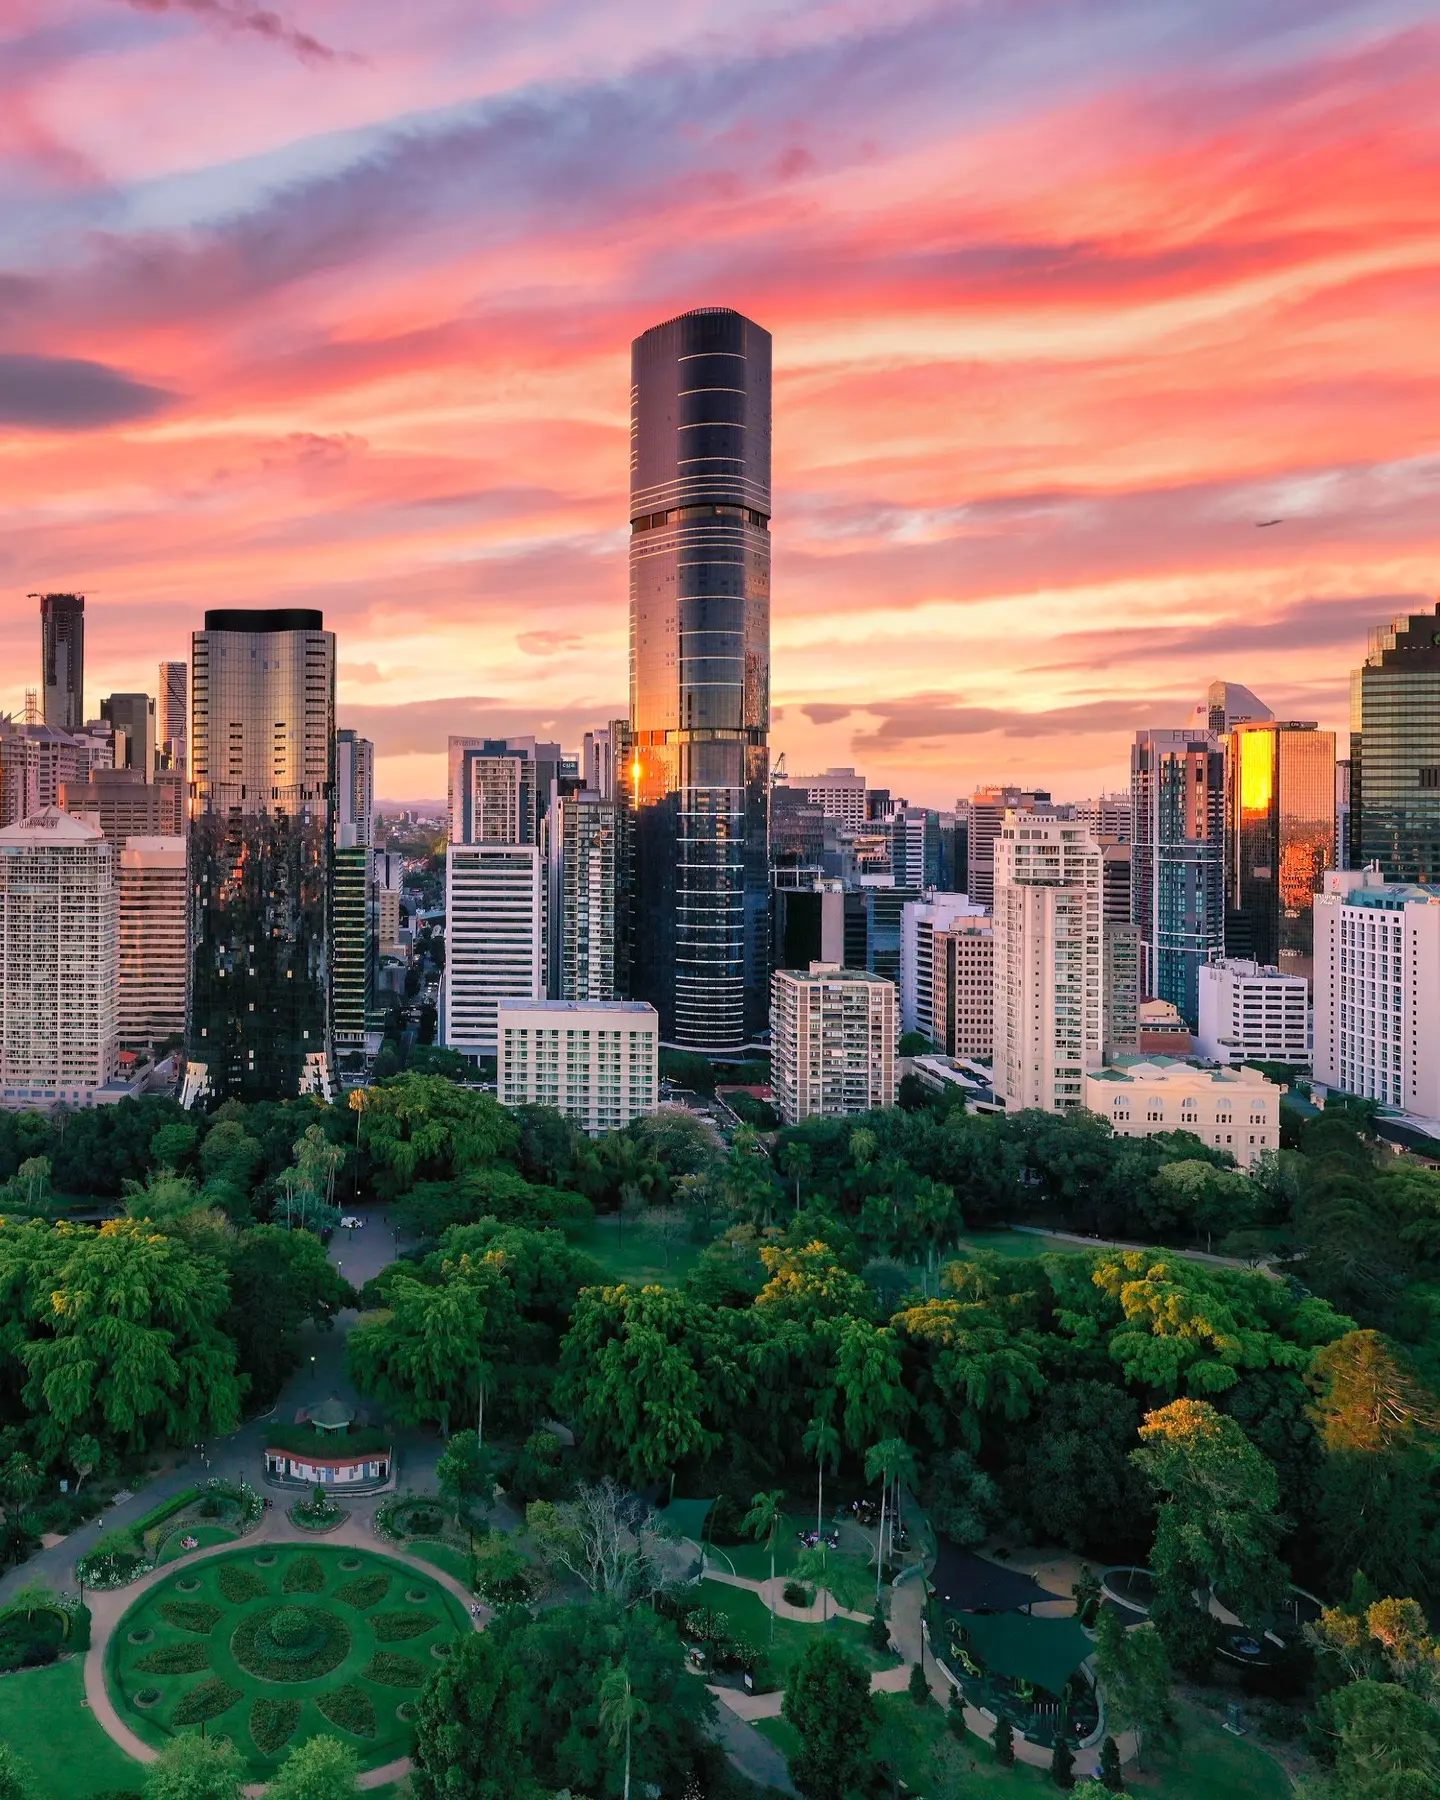 Aerial view of Botanic Gardens, Brisbane River and Brisbane CBD skyline at sunset. Image credit: Tourism and Events Queensland